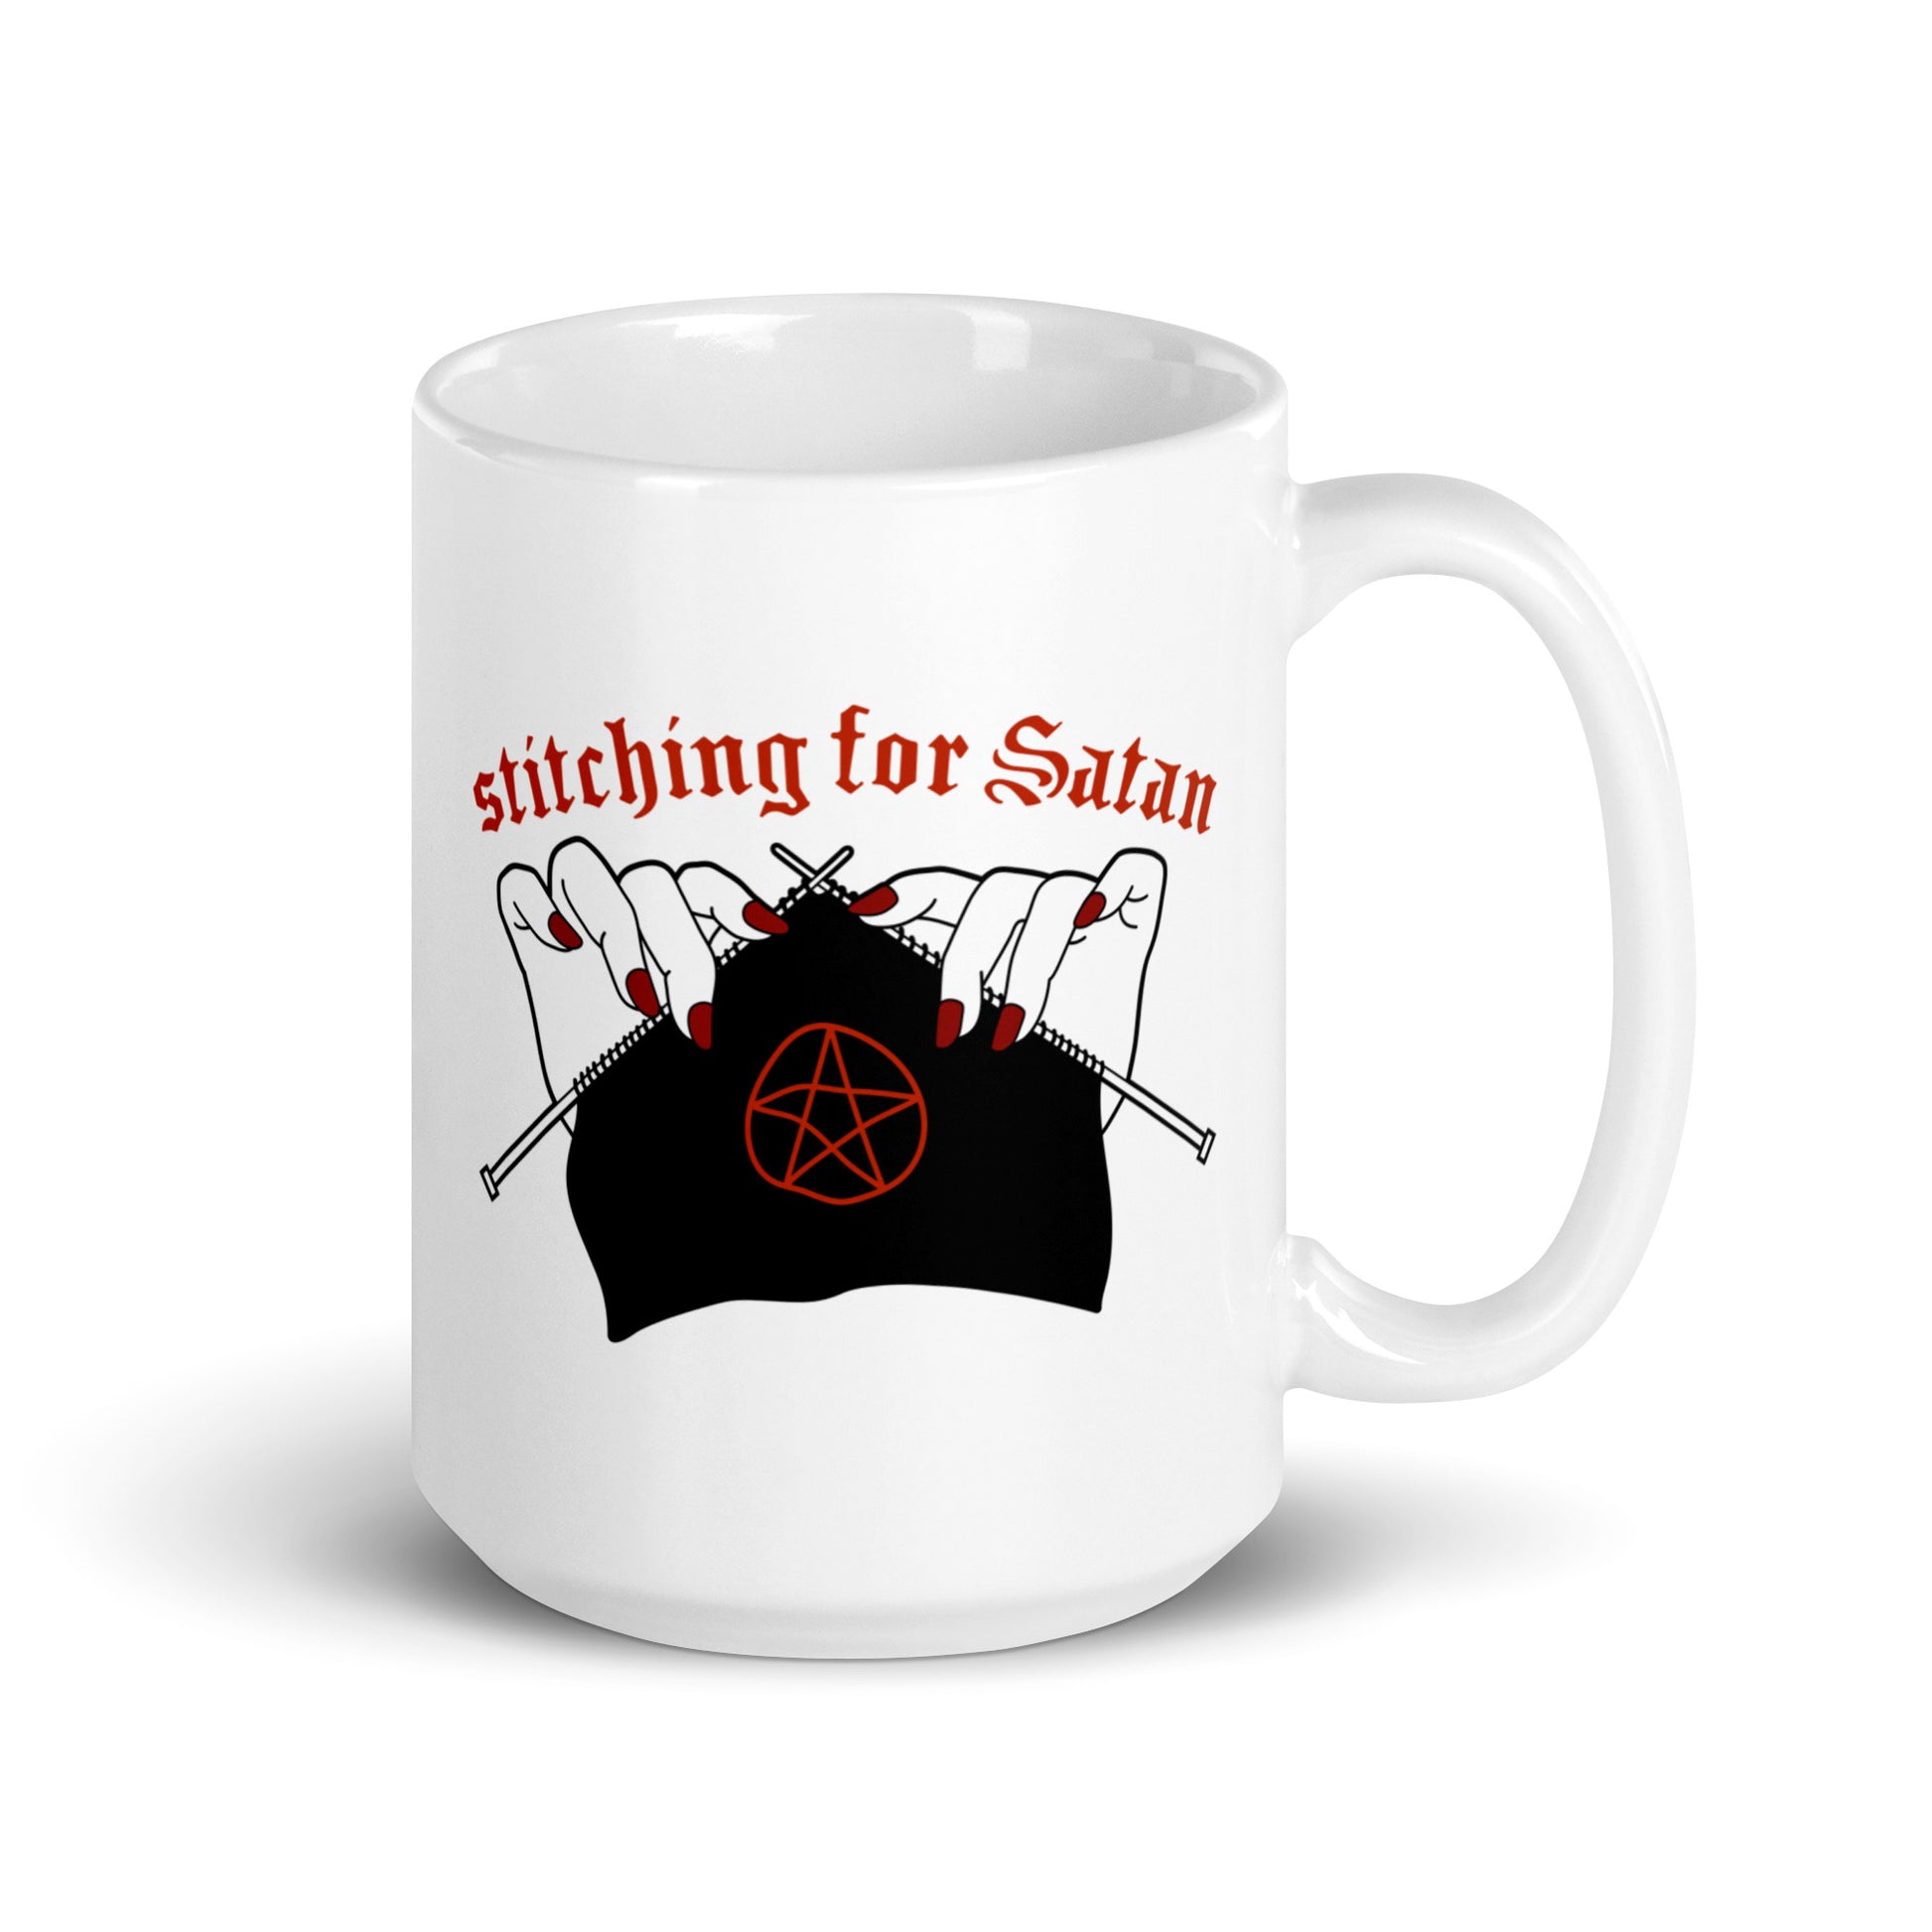 A white 15oz ceramic coffee mug featuring an illustration of pale white hands with red fingernails holding knitting needles. Fabric on the needles features a red pentagram. Text above the hands reads "stitching for Satan" in a gothc red font.